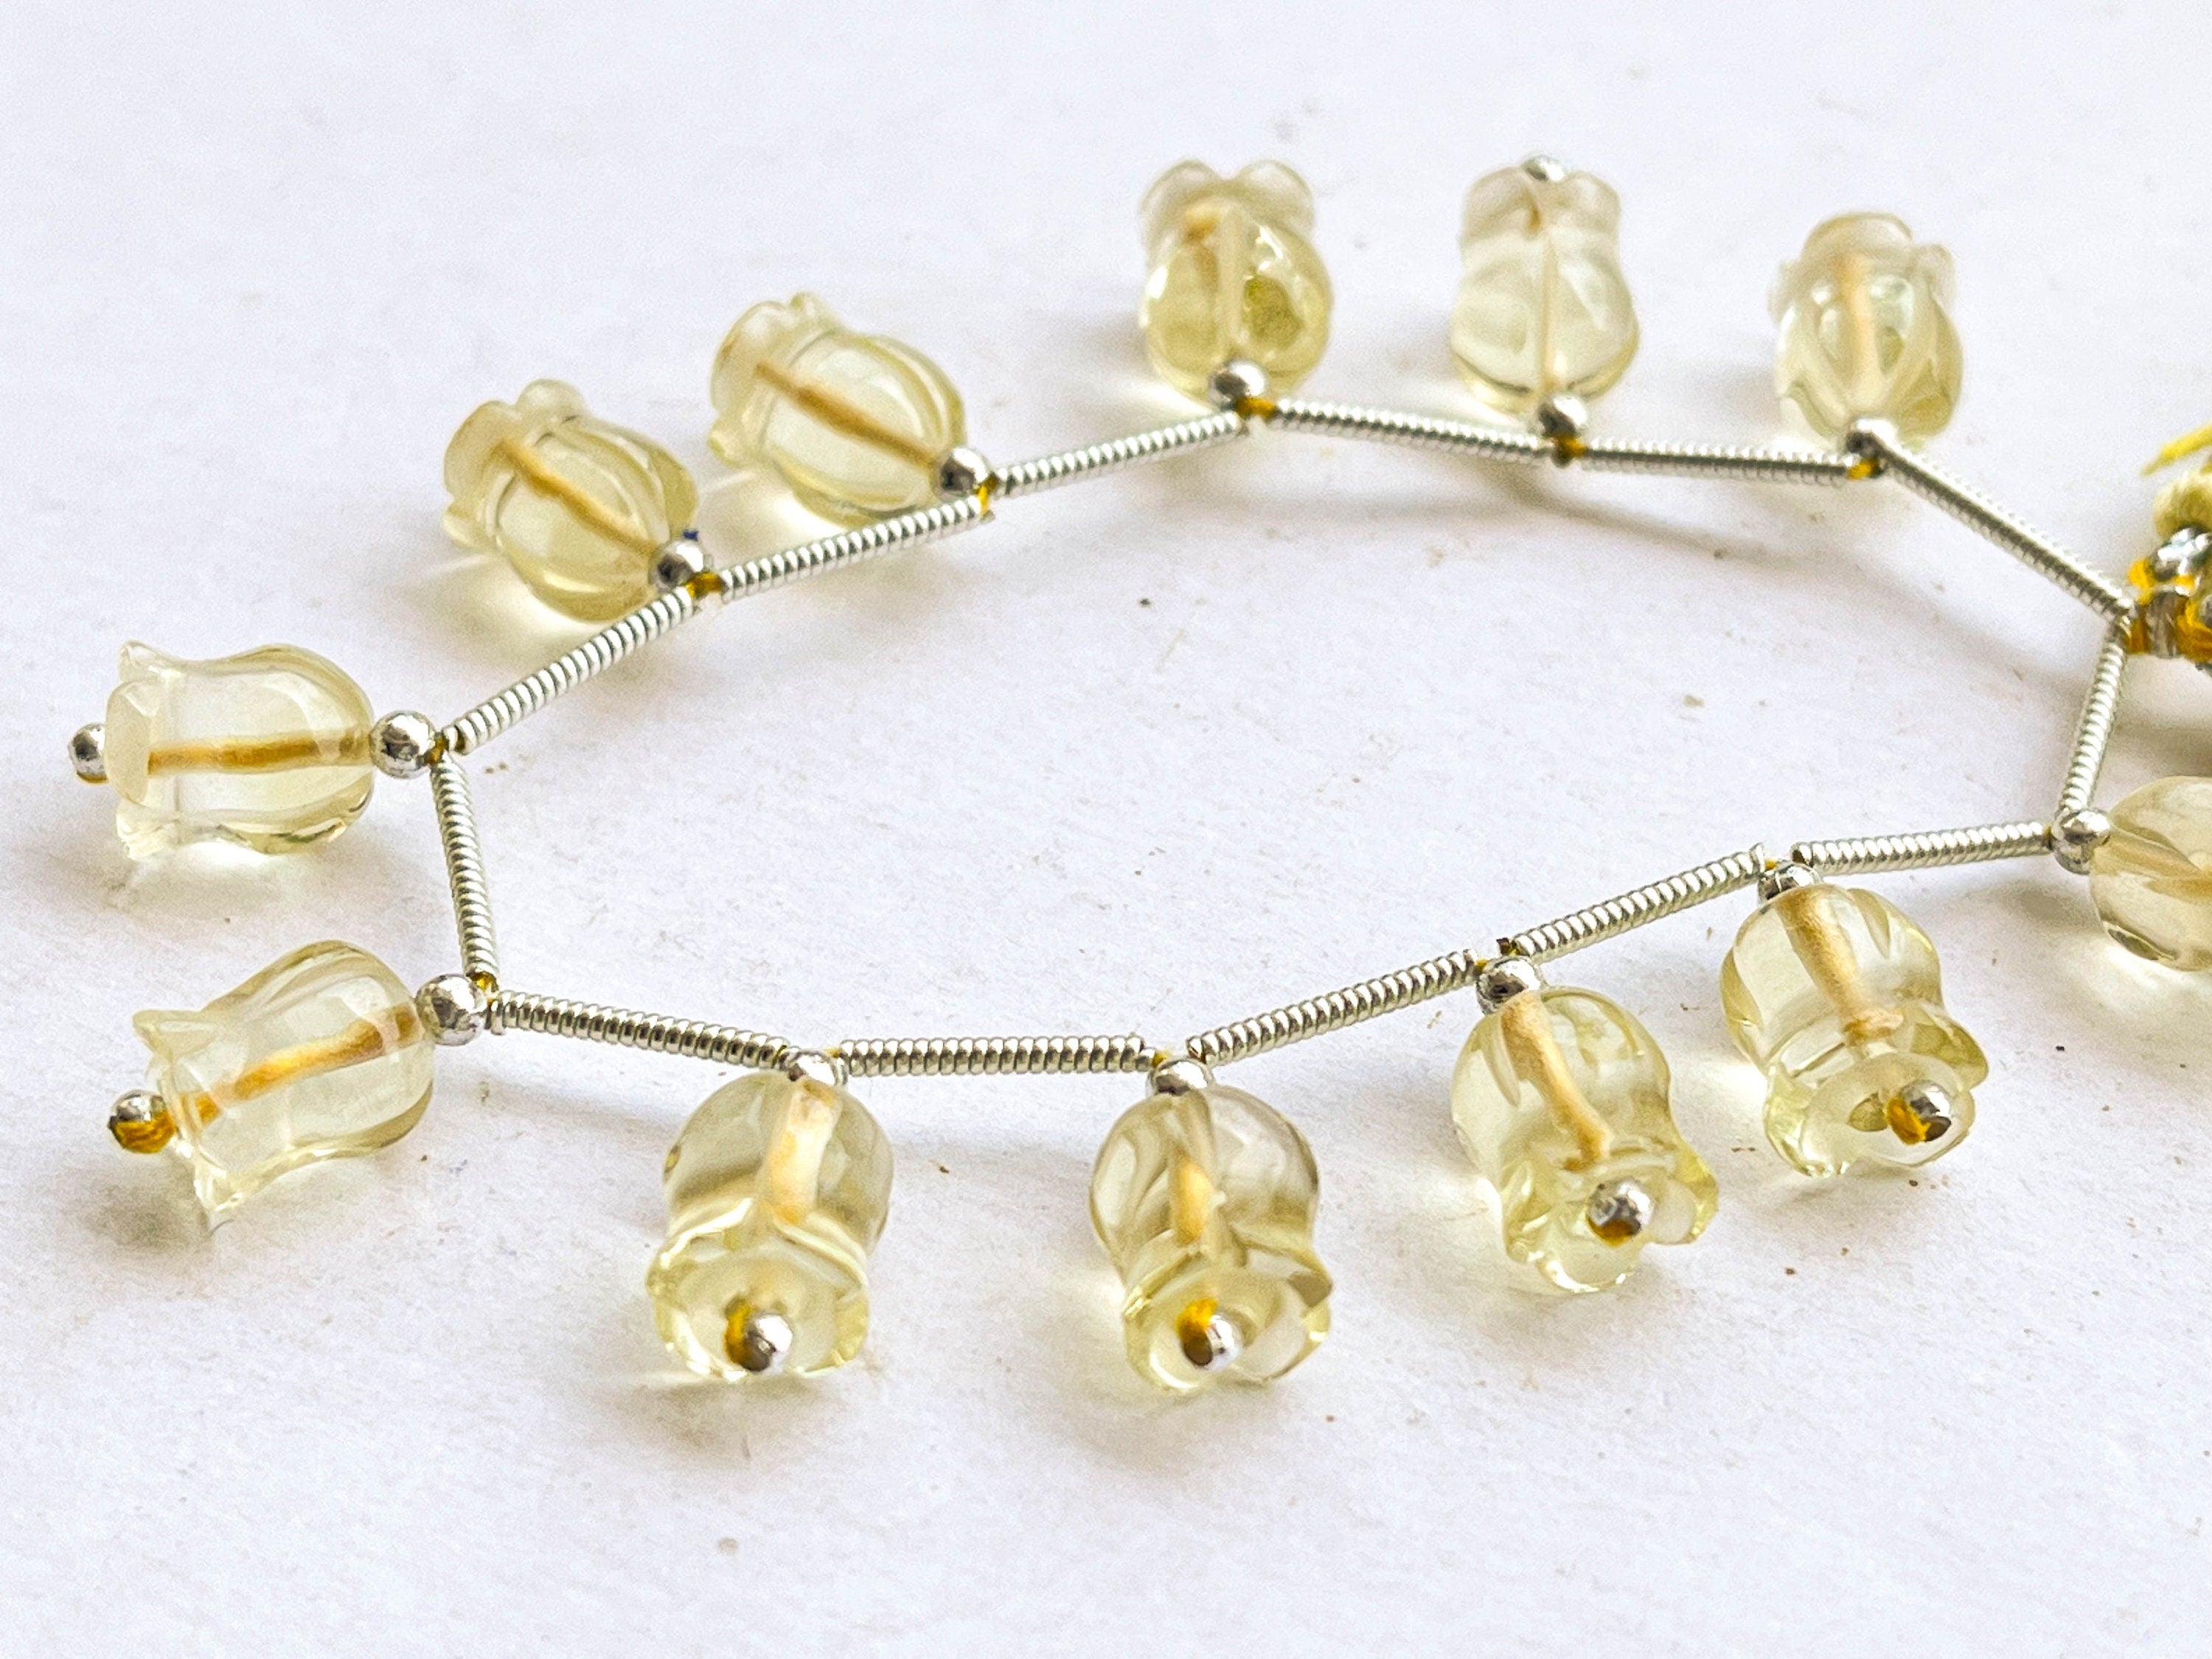 12 Pieces Lemon Quartz flower carving Lily of the valley shape beads Beadsforyourjewelry